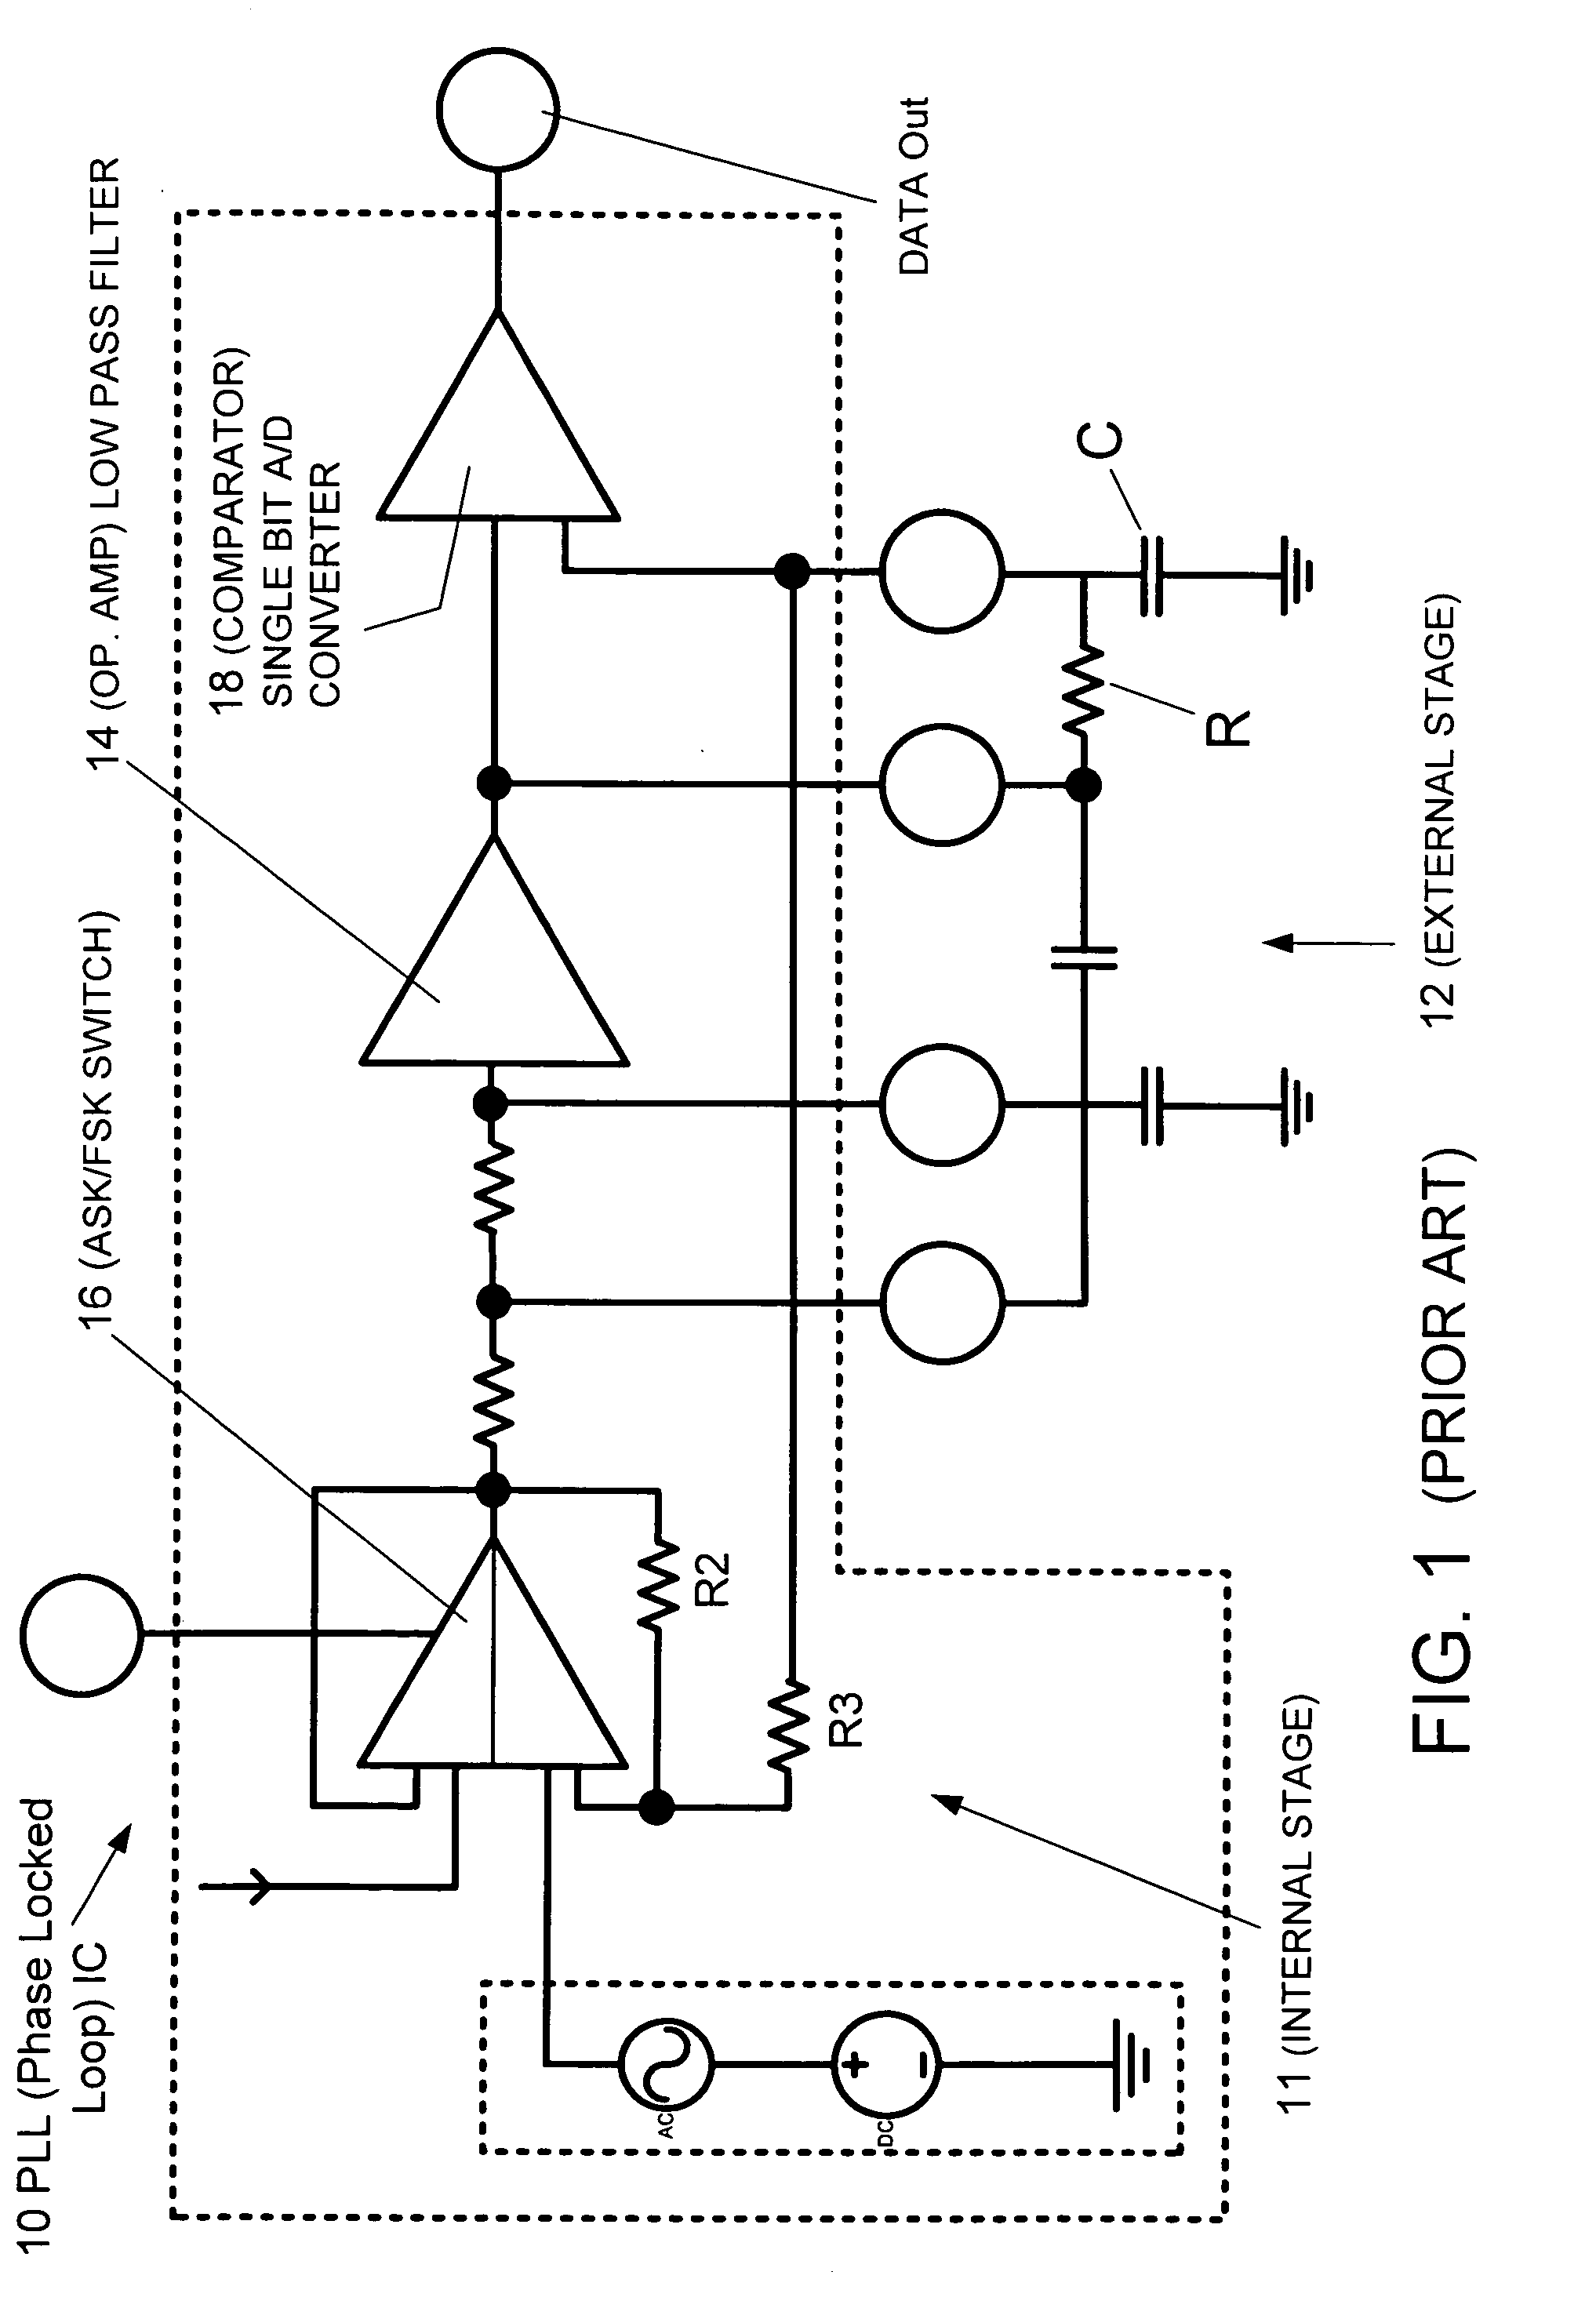 IF derived data slicer reference voltage circuit